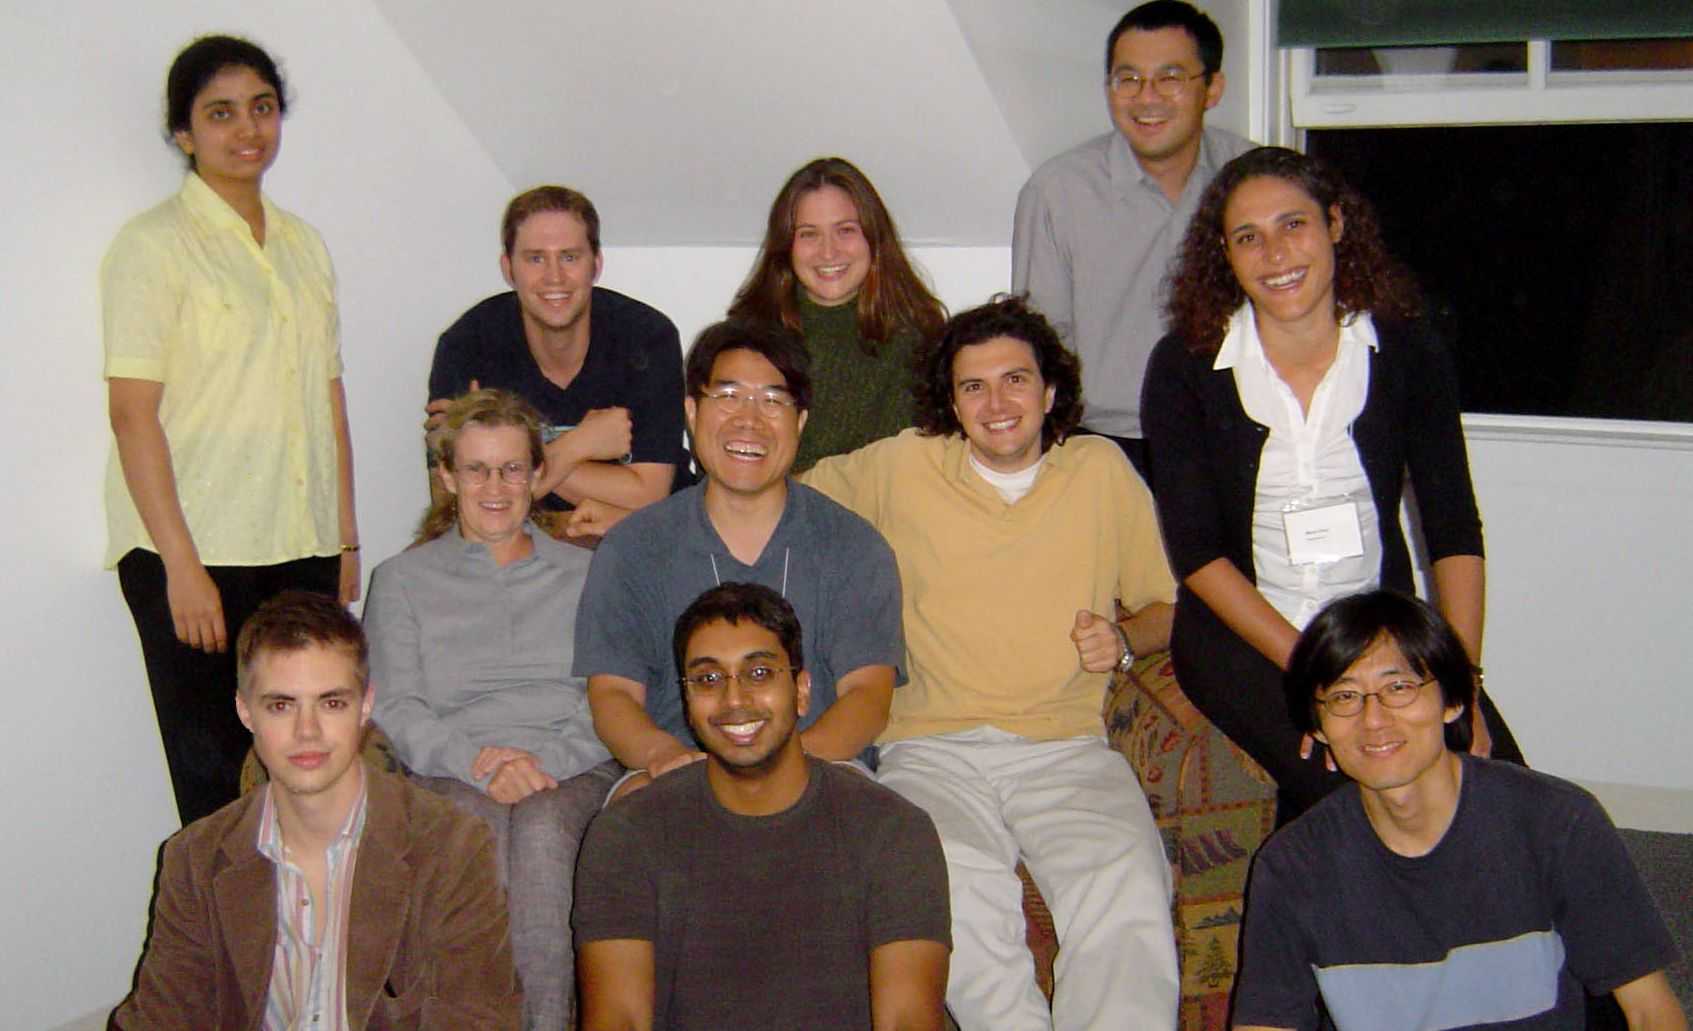 In 2003, early in his career at Whitehead, Sabatini (middle row, second from right) joined members of his then modest-sized lab at a scientific retreat.
